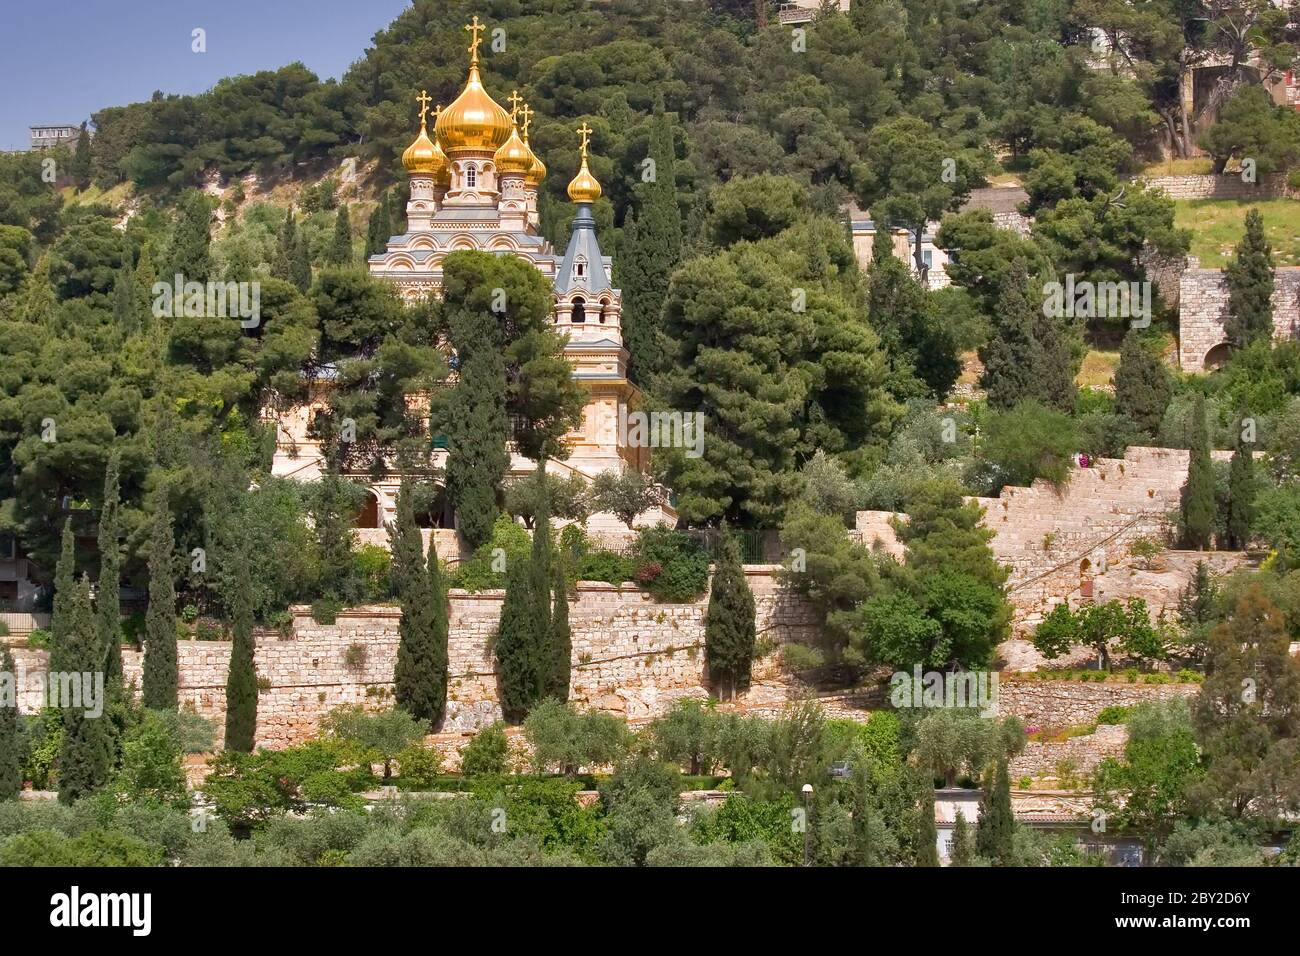 Gold domes. Stock Photo